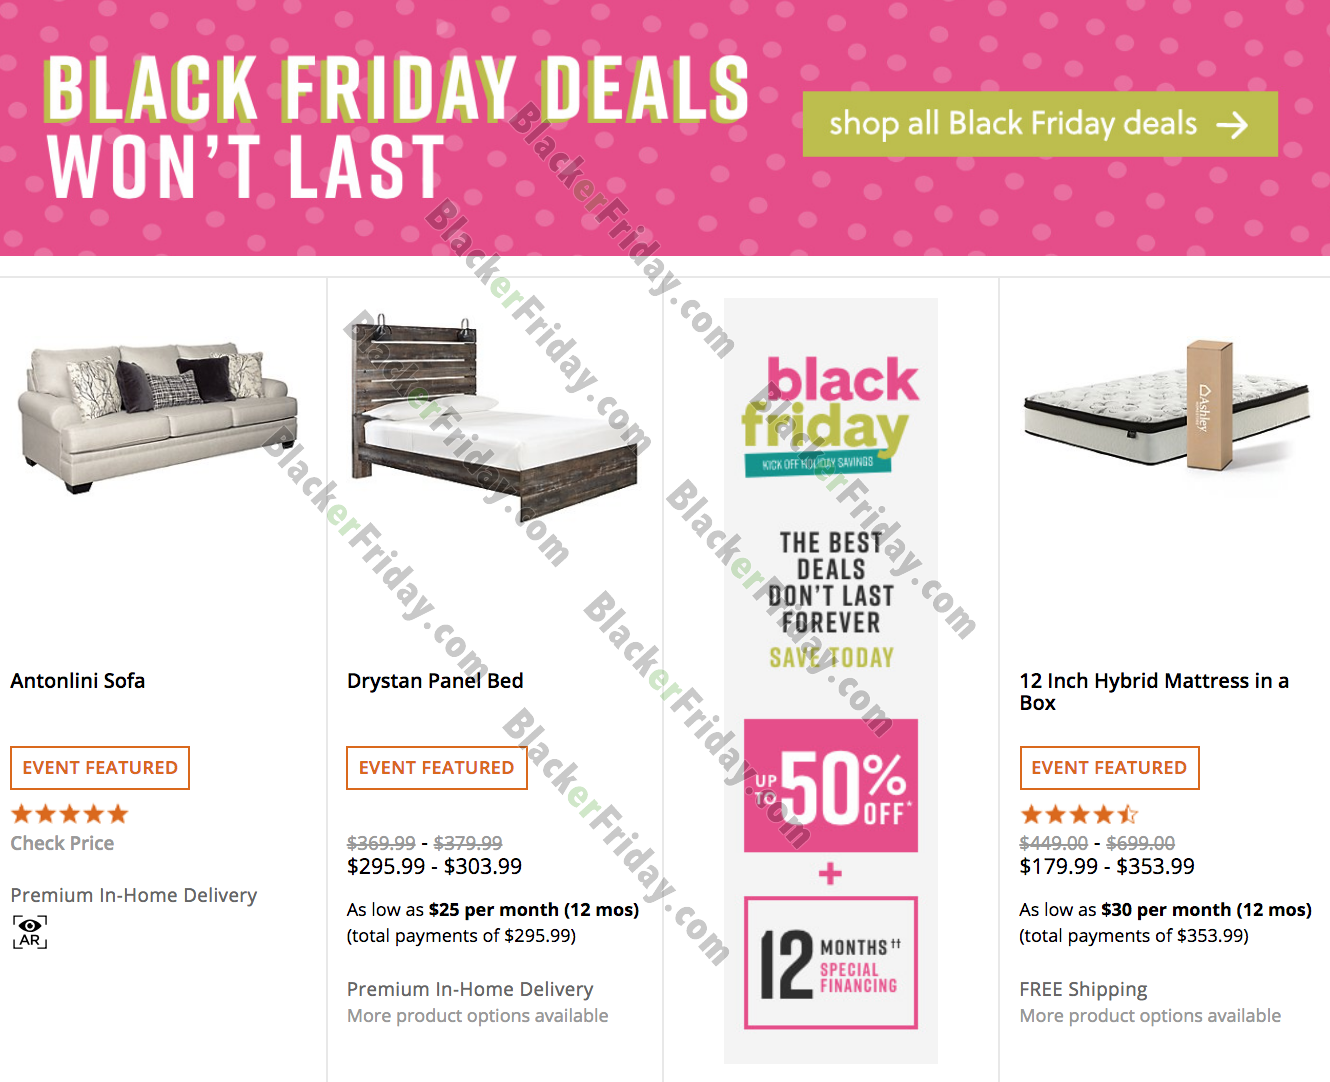 Ashley Furniture Homestore Black Friday 2020 Sale - What to Expect - Blacker Friday